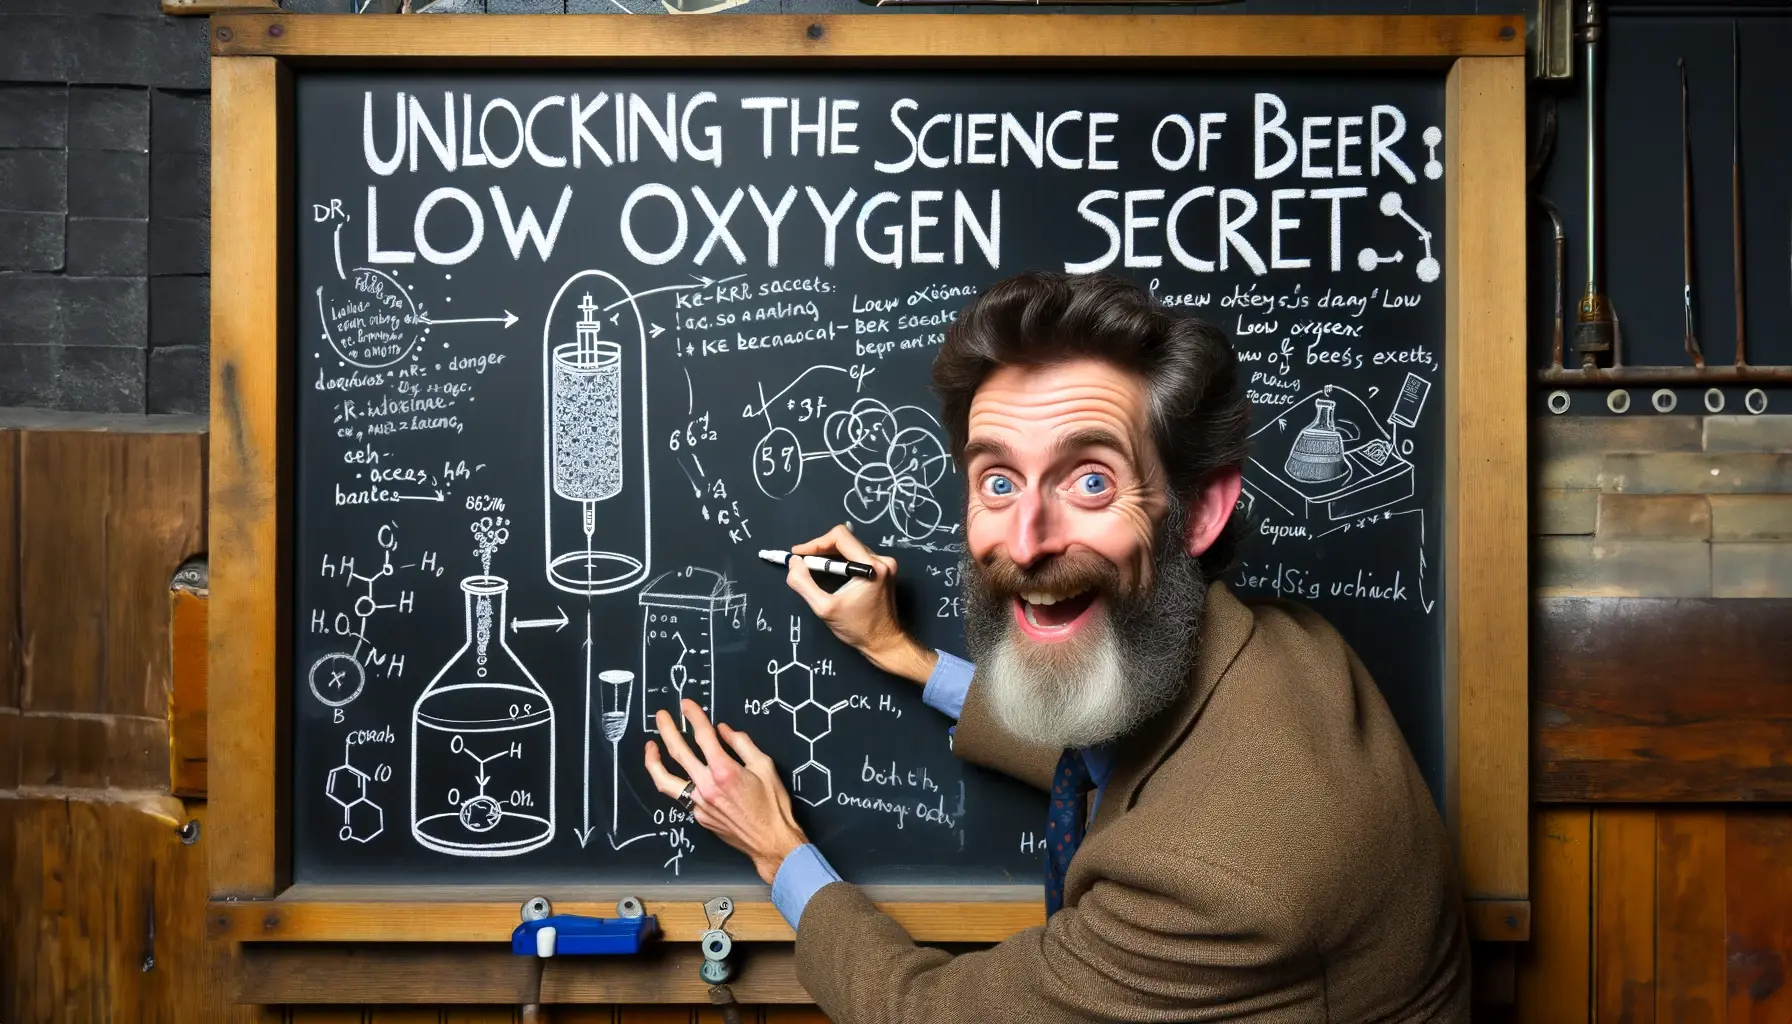 Photograph of Dr. Hans in front of a large blackboard, drawing a diagram that explains the science of low oxygen kegging.